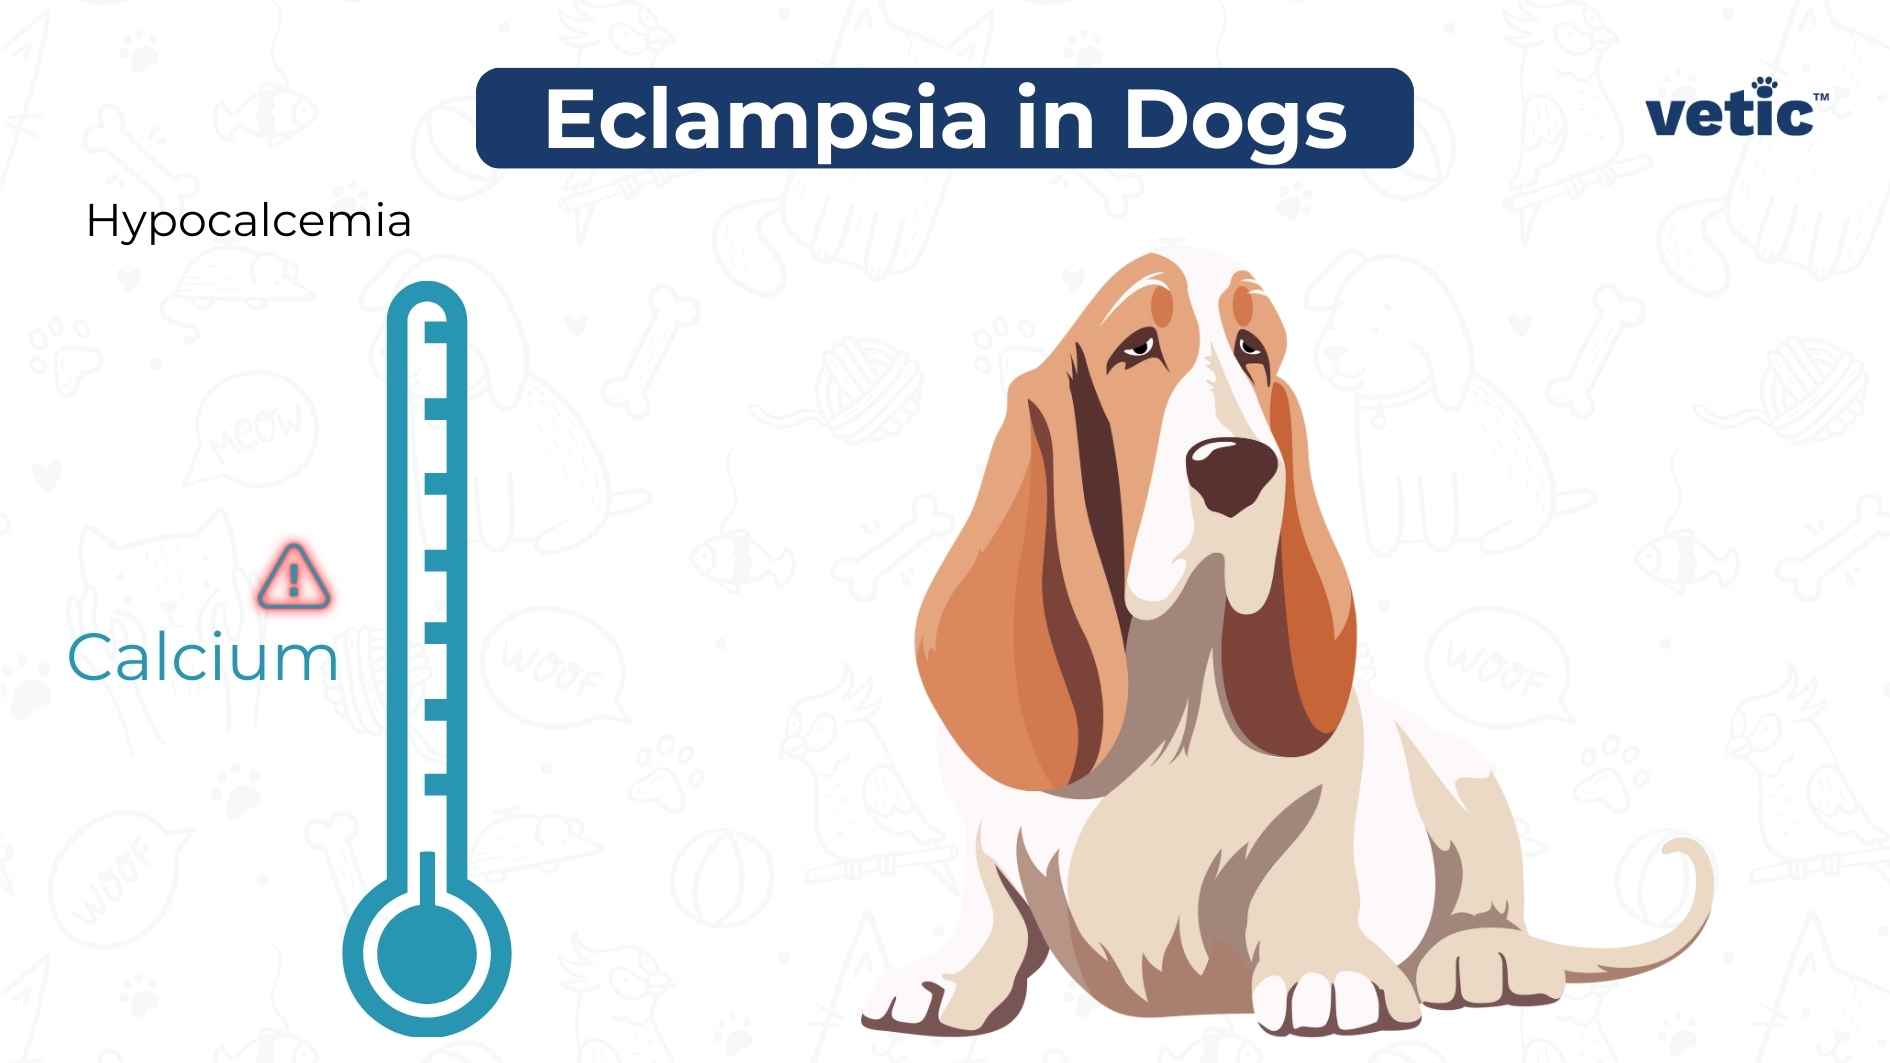 Eclampsia in Dogs is Hypocalcemia